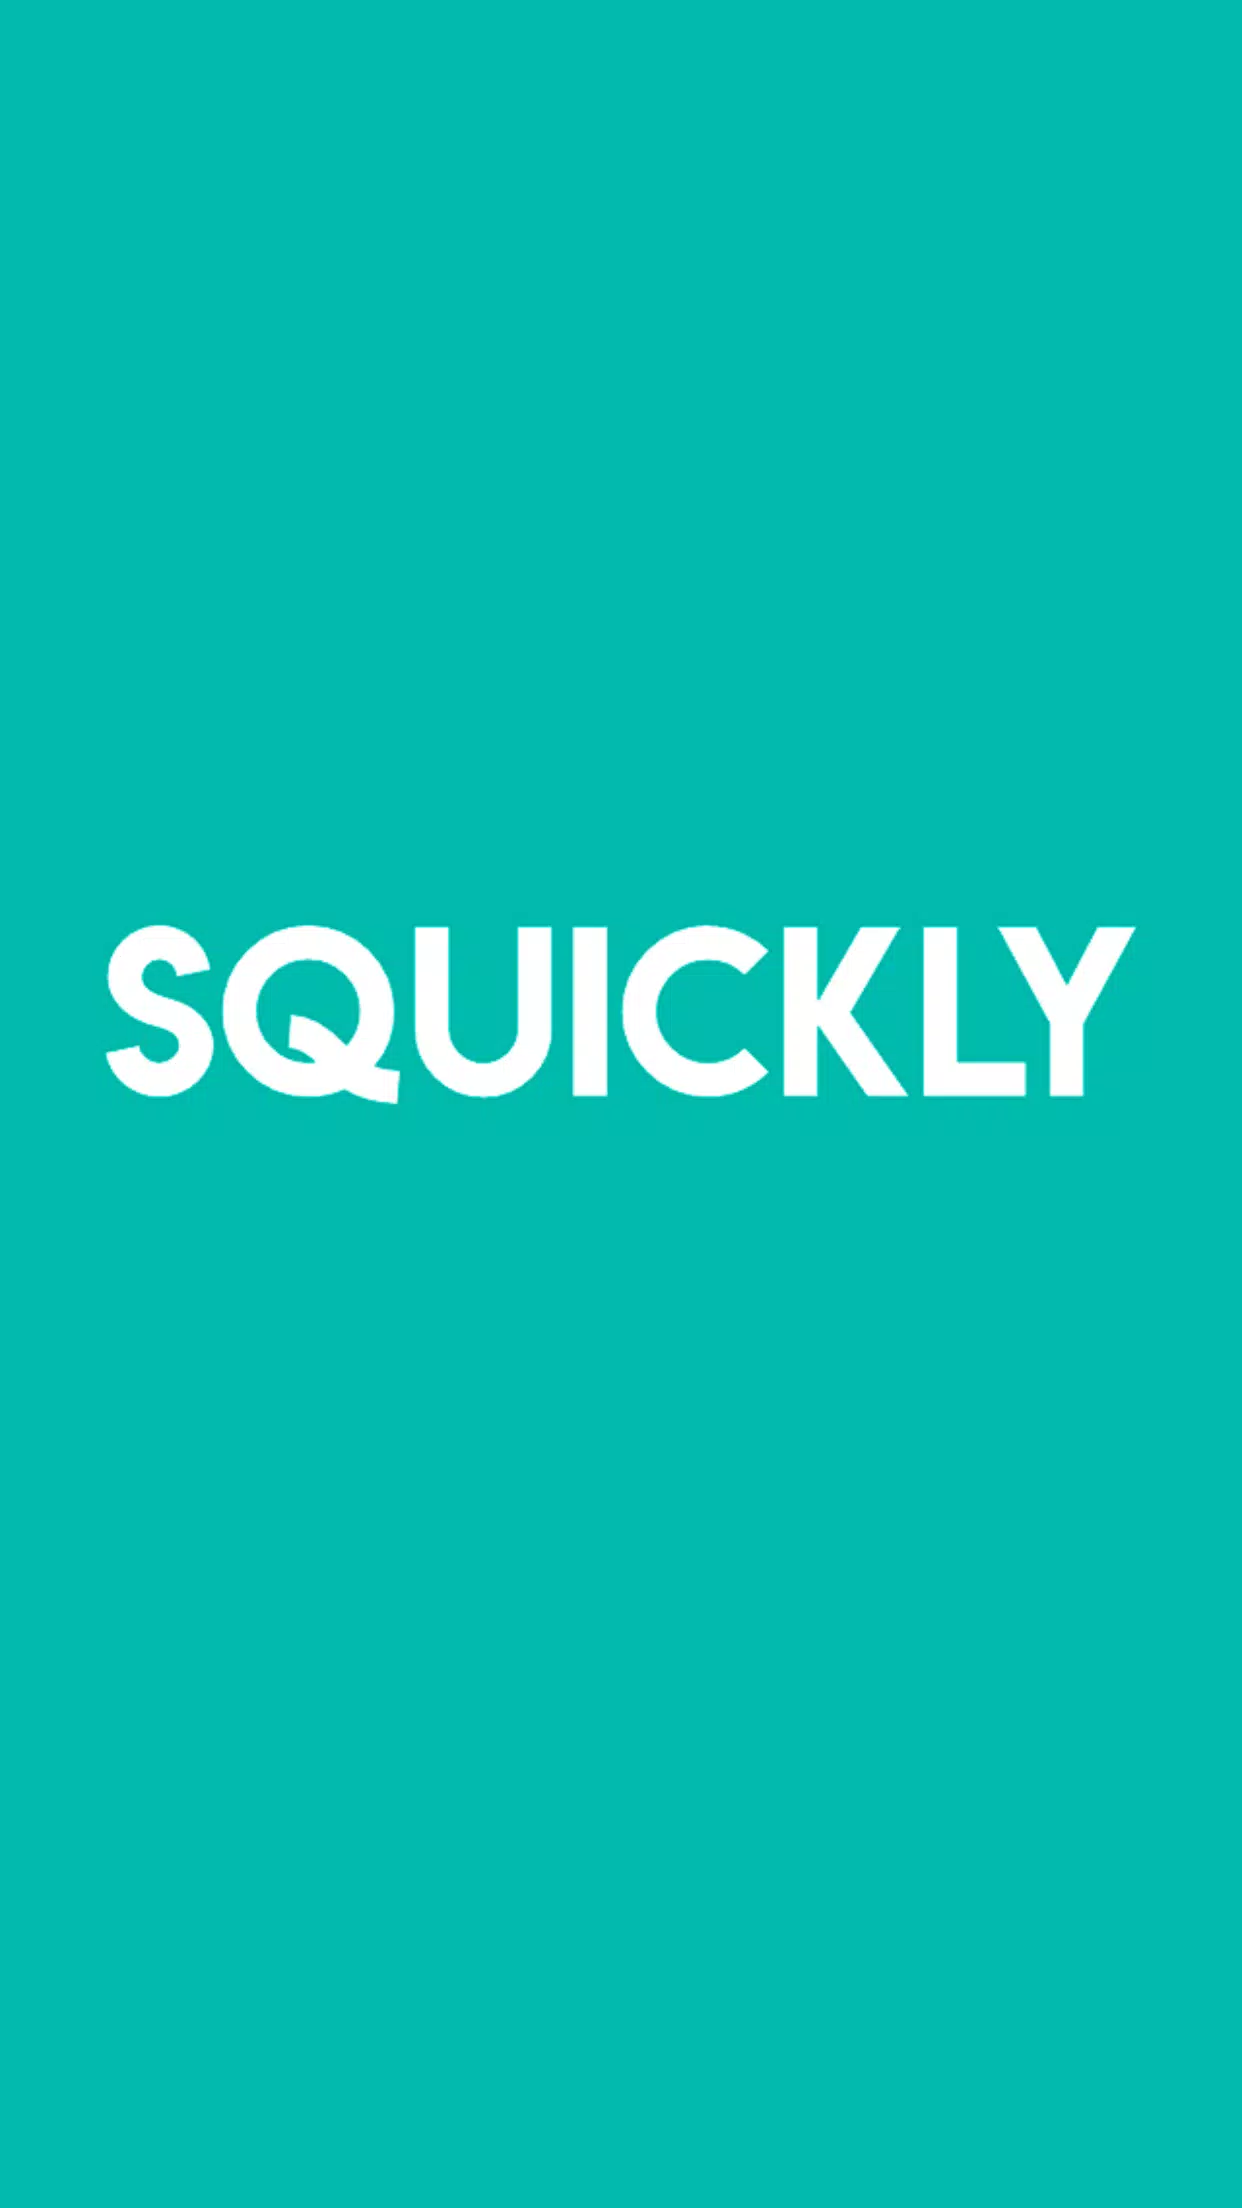 Squickly